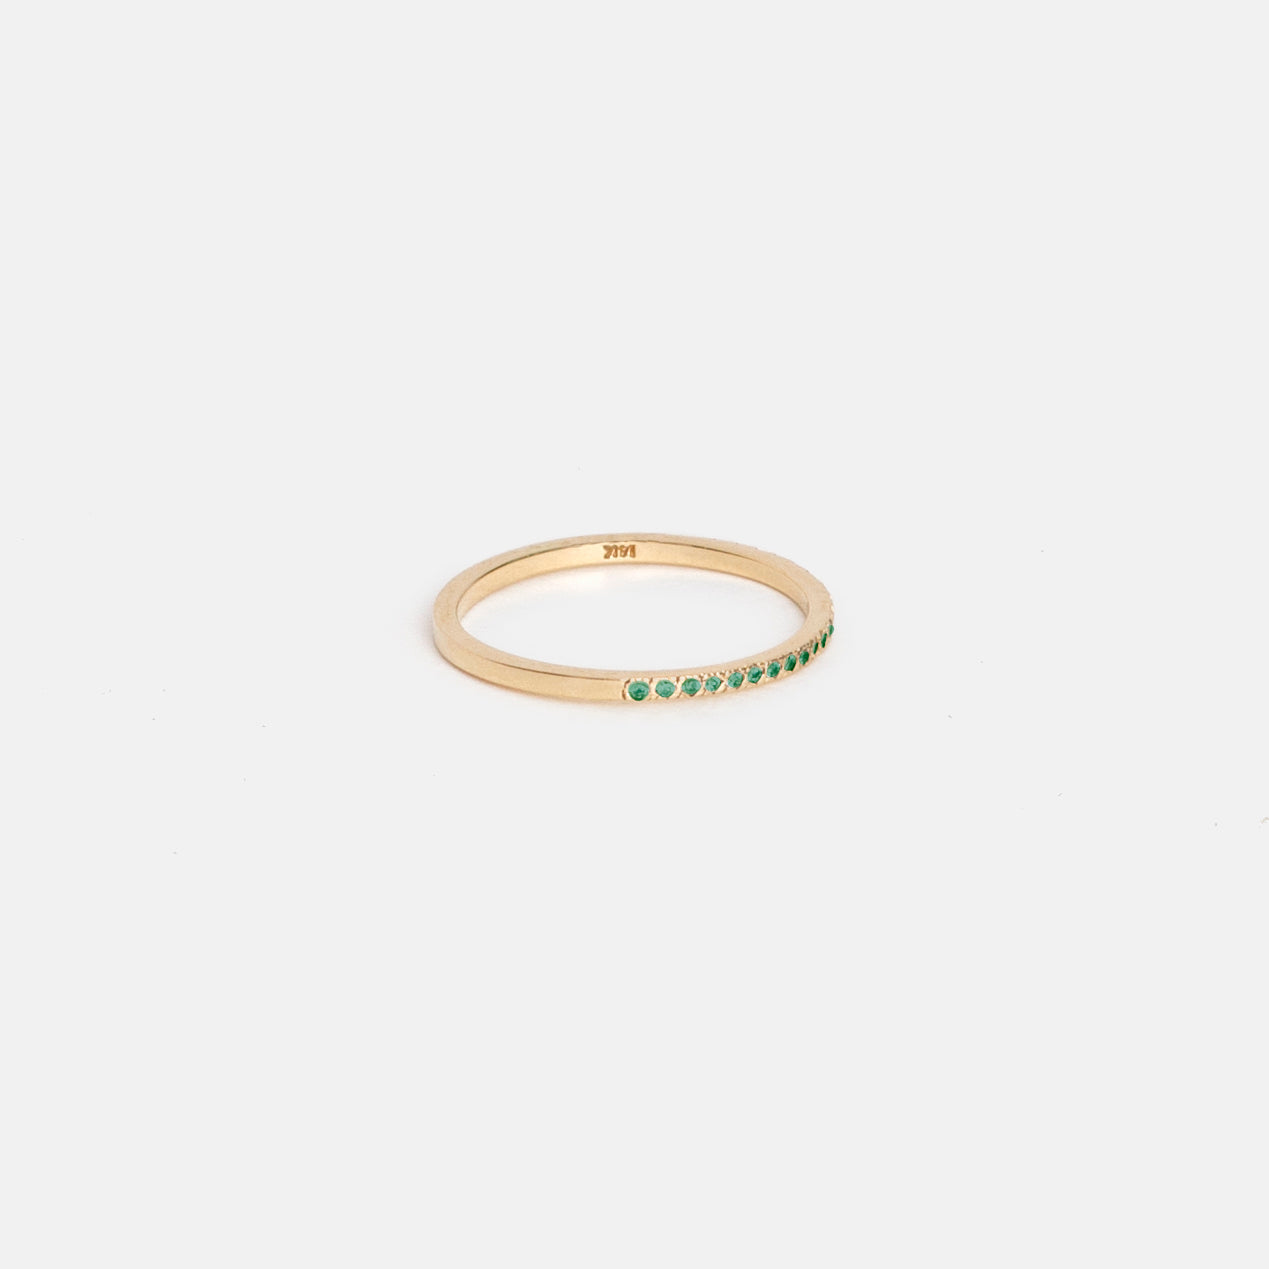 Eile Minimal Ring in 14k Gold set with Emeralds By SHW Fine Jewelry NYC